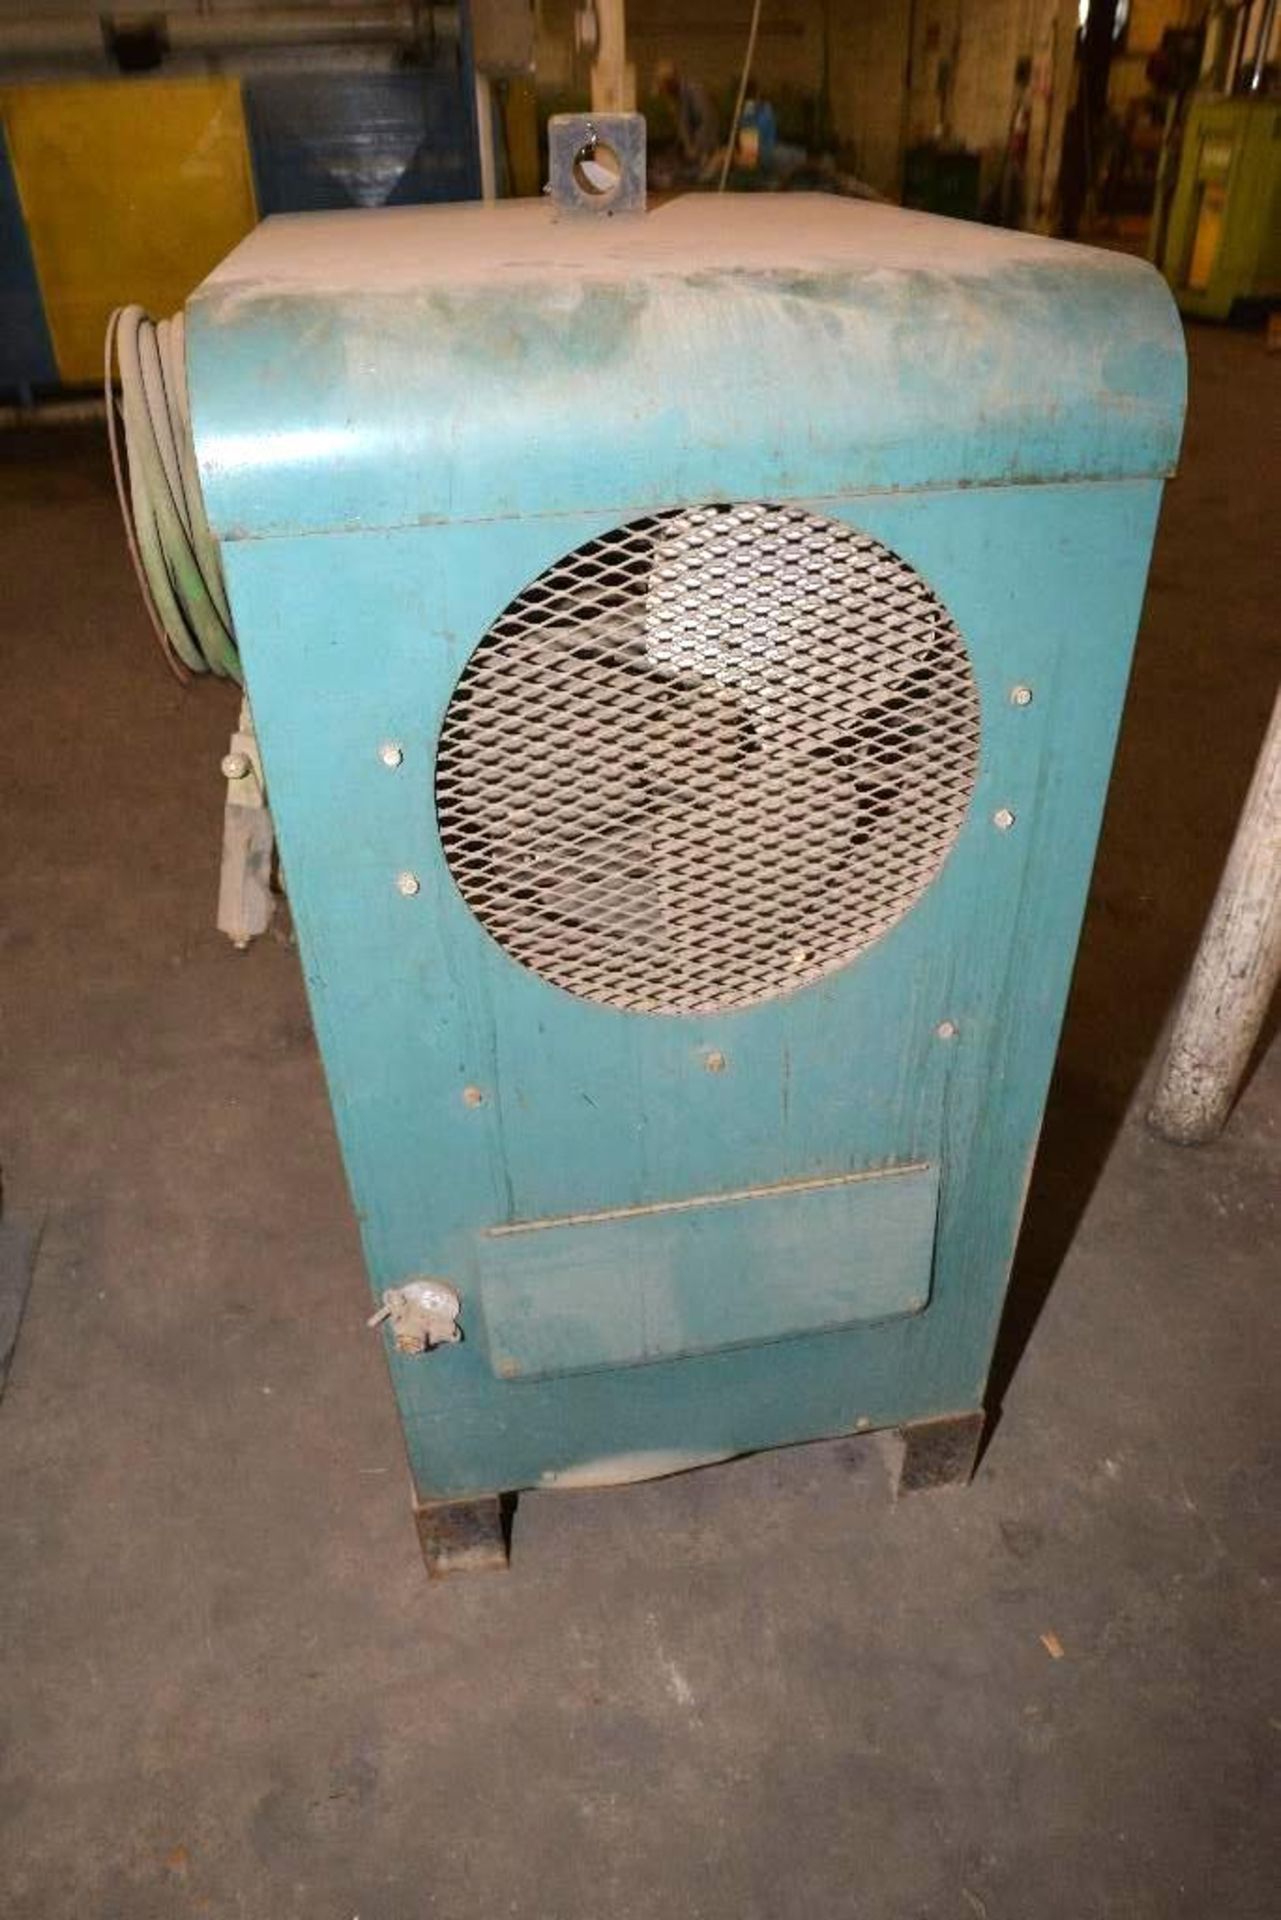 AIR PRODUCTS DIS-ARC WELDER MODEL: THRFC300RJS/N: 1526448 SINGLE PHASECONDITION UNKNOWN - Image 3 of 3